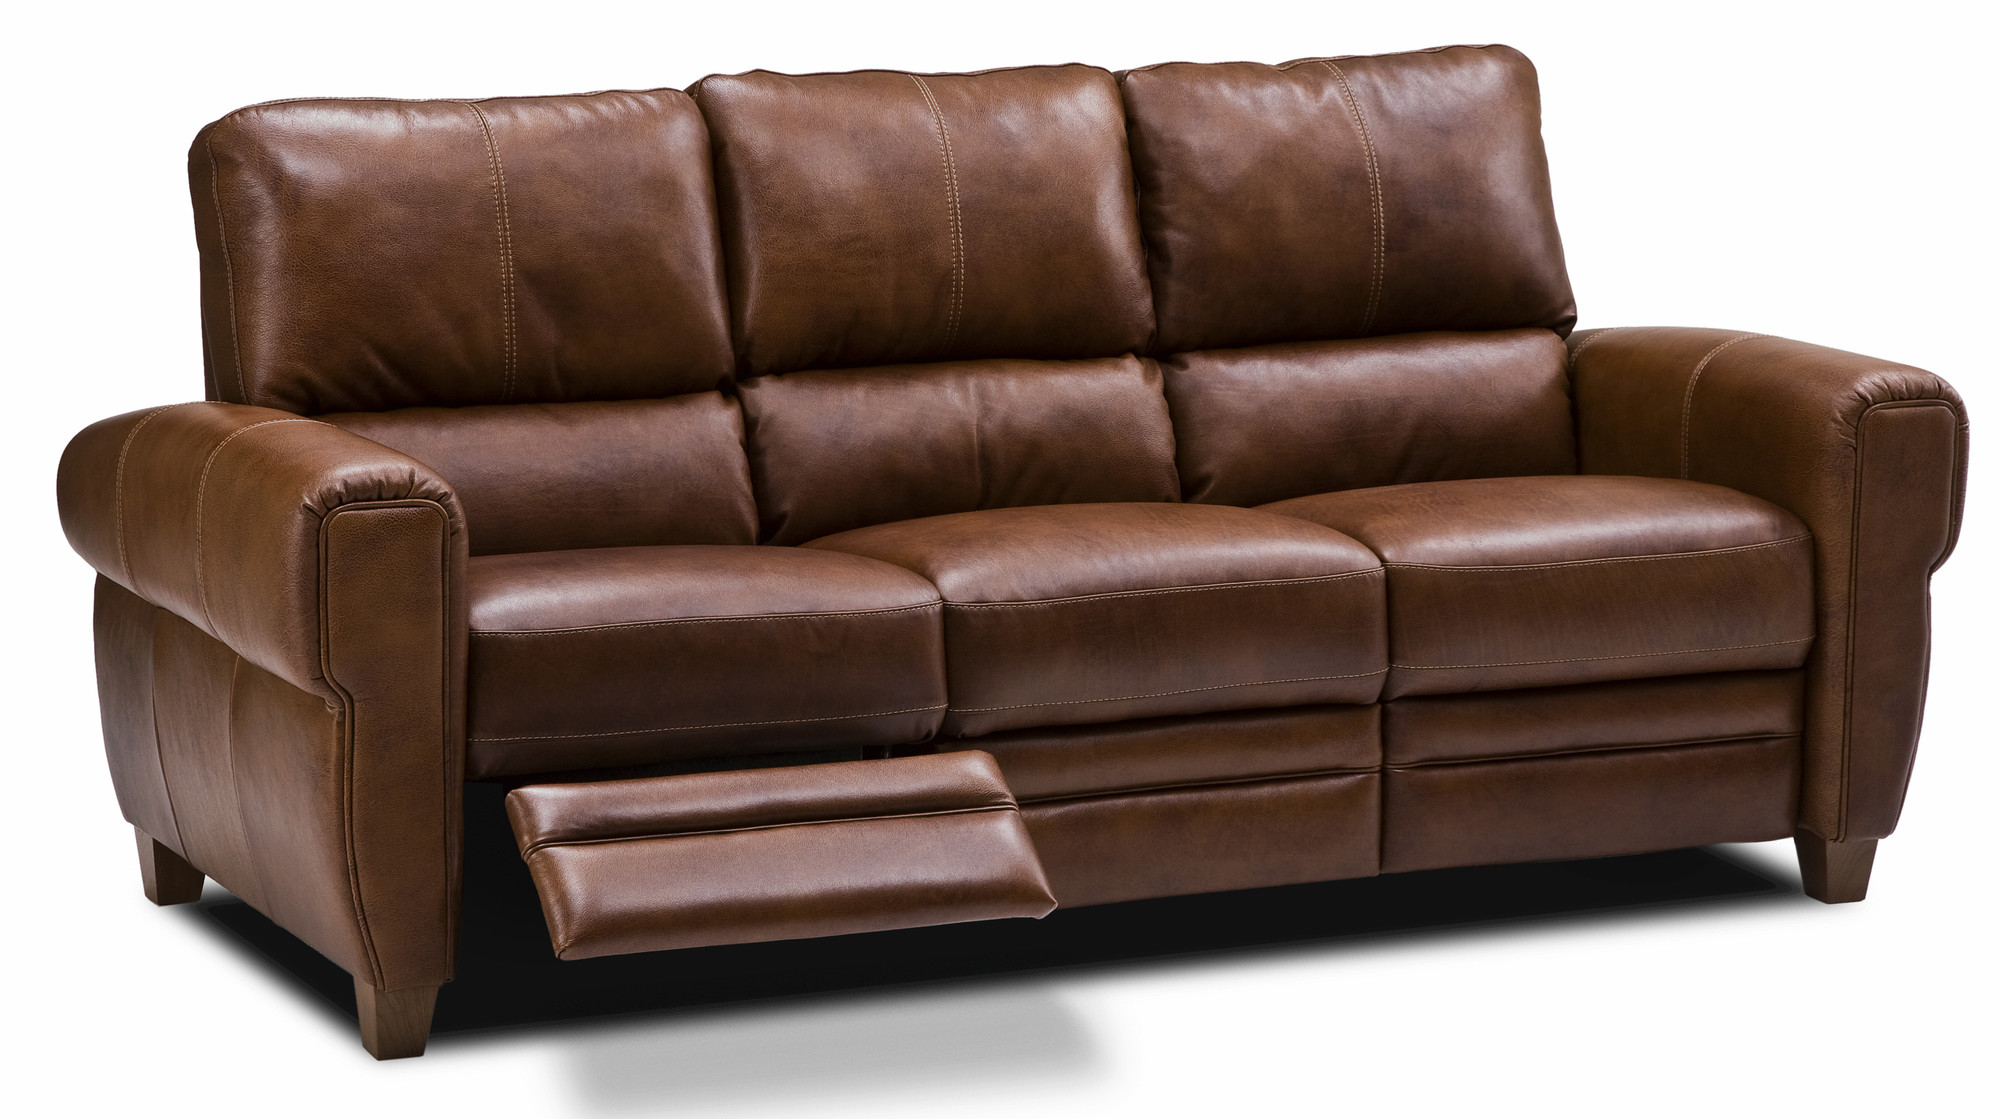 leather reclining sectional sofa with ottoman